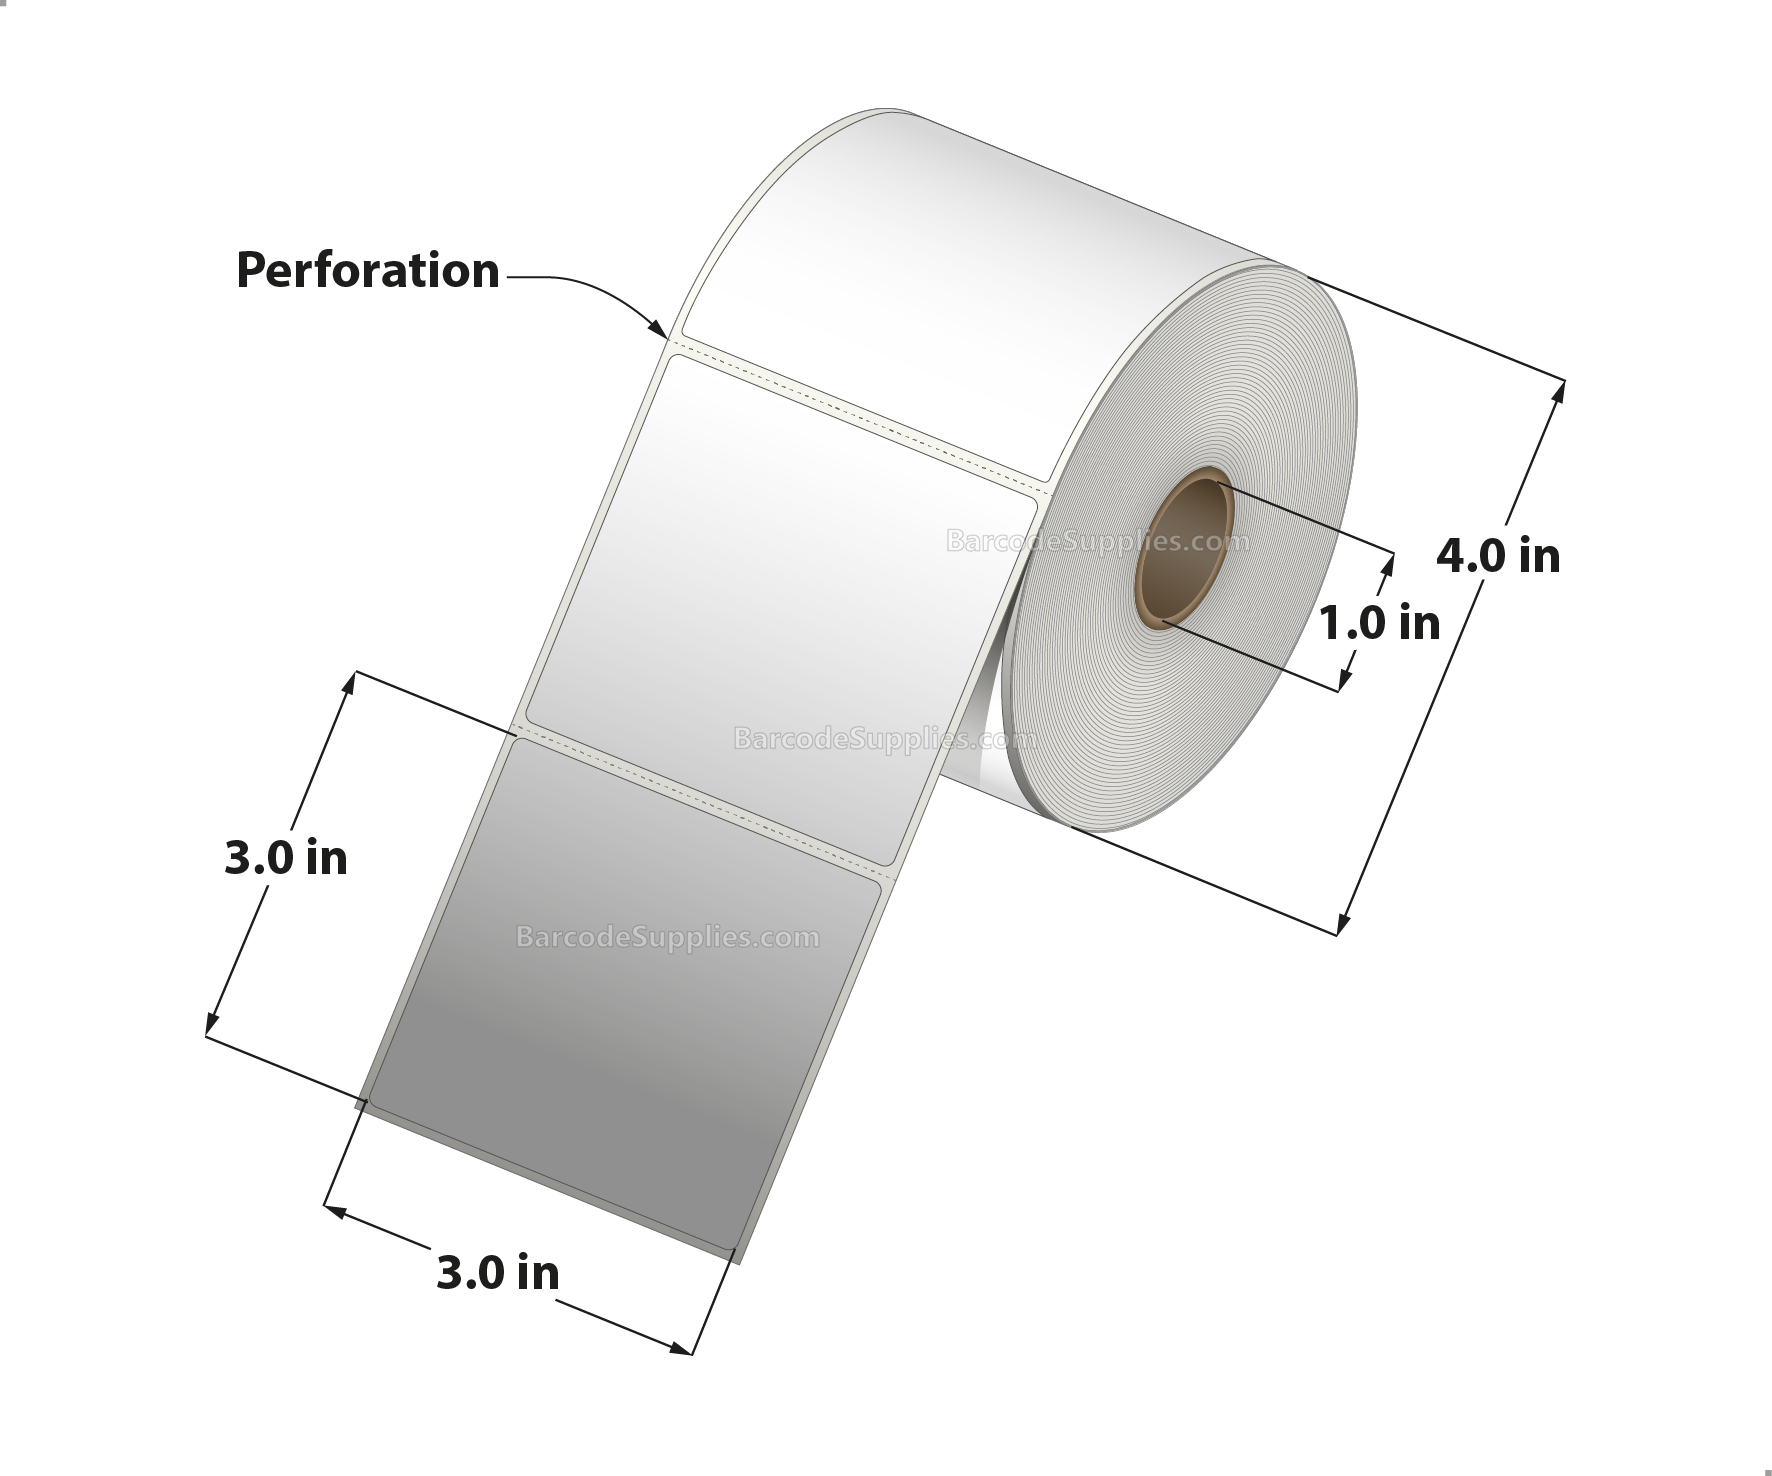 3 x 3 Thermal Transfer White Labels With Permanent Adhesive - Perforated - 500 Labels Per Roll - Carton Of 12 Rolls - 6000 Labels Total - MPN: RT-3-3-500-1